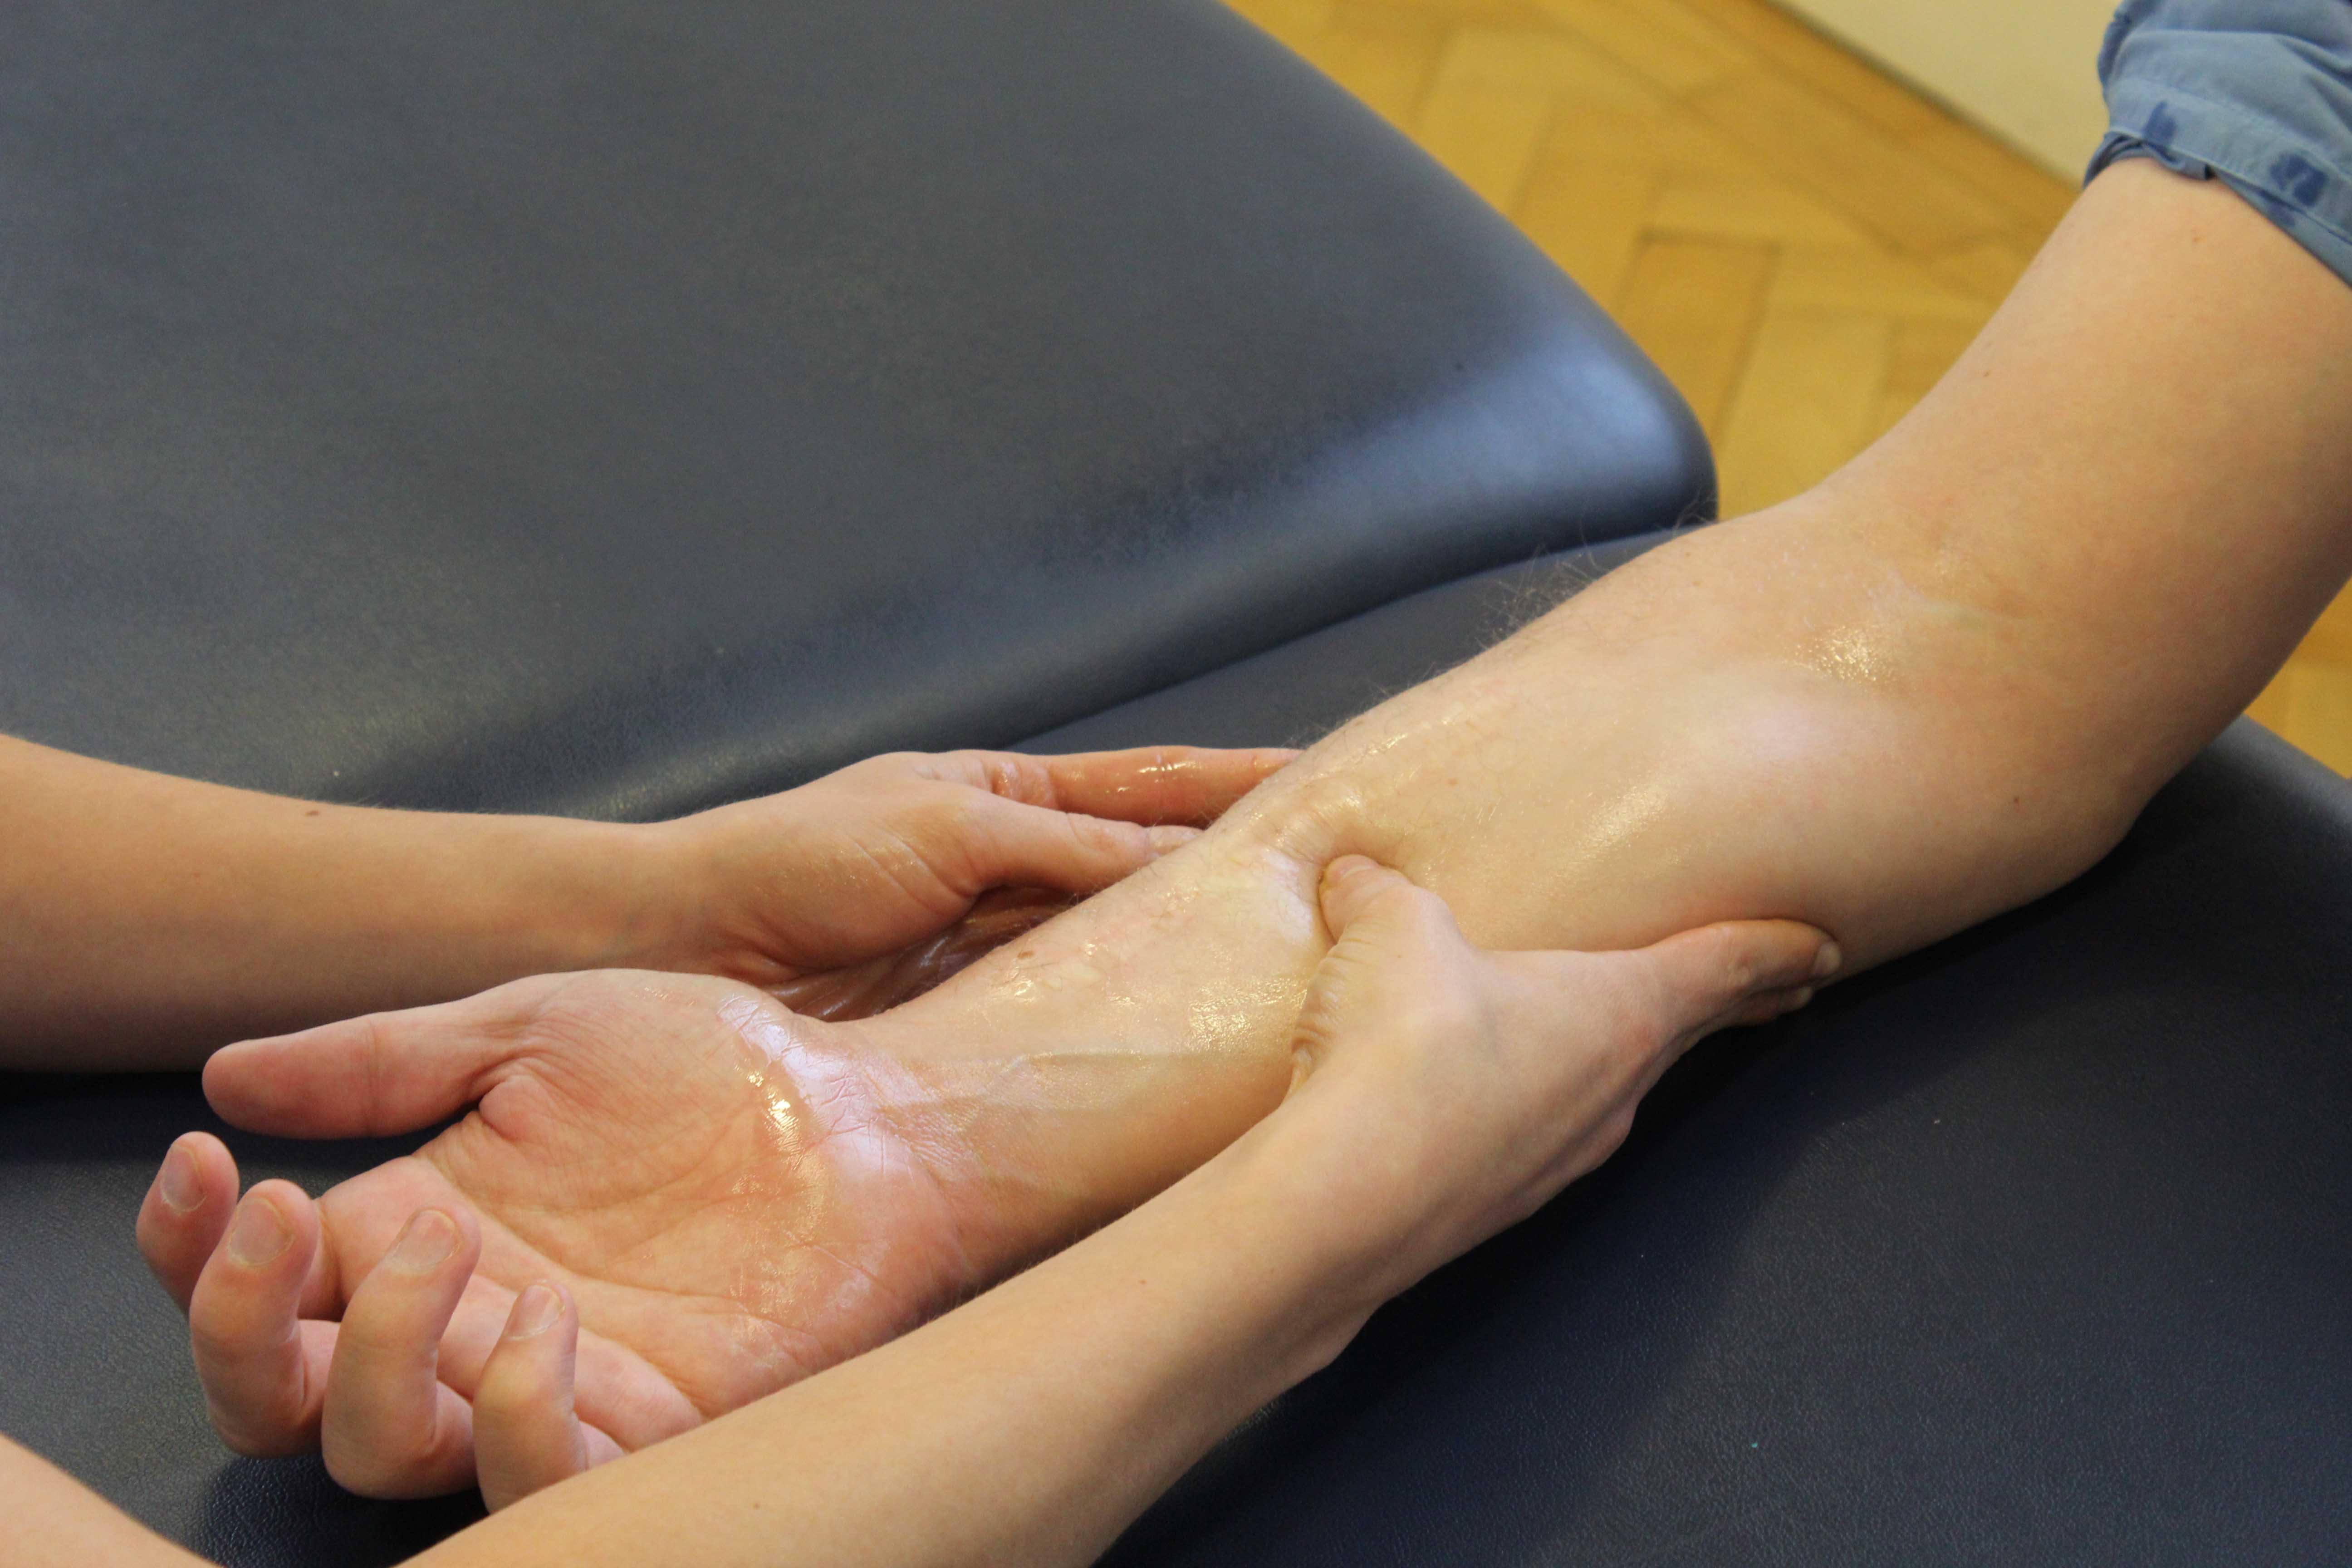 Soft tissue massage of the pectrol muscle by experienced therapist